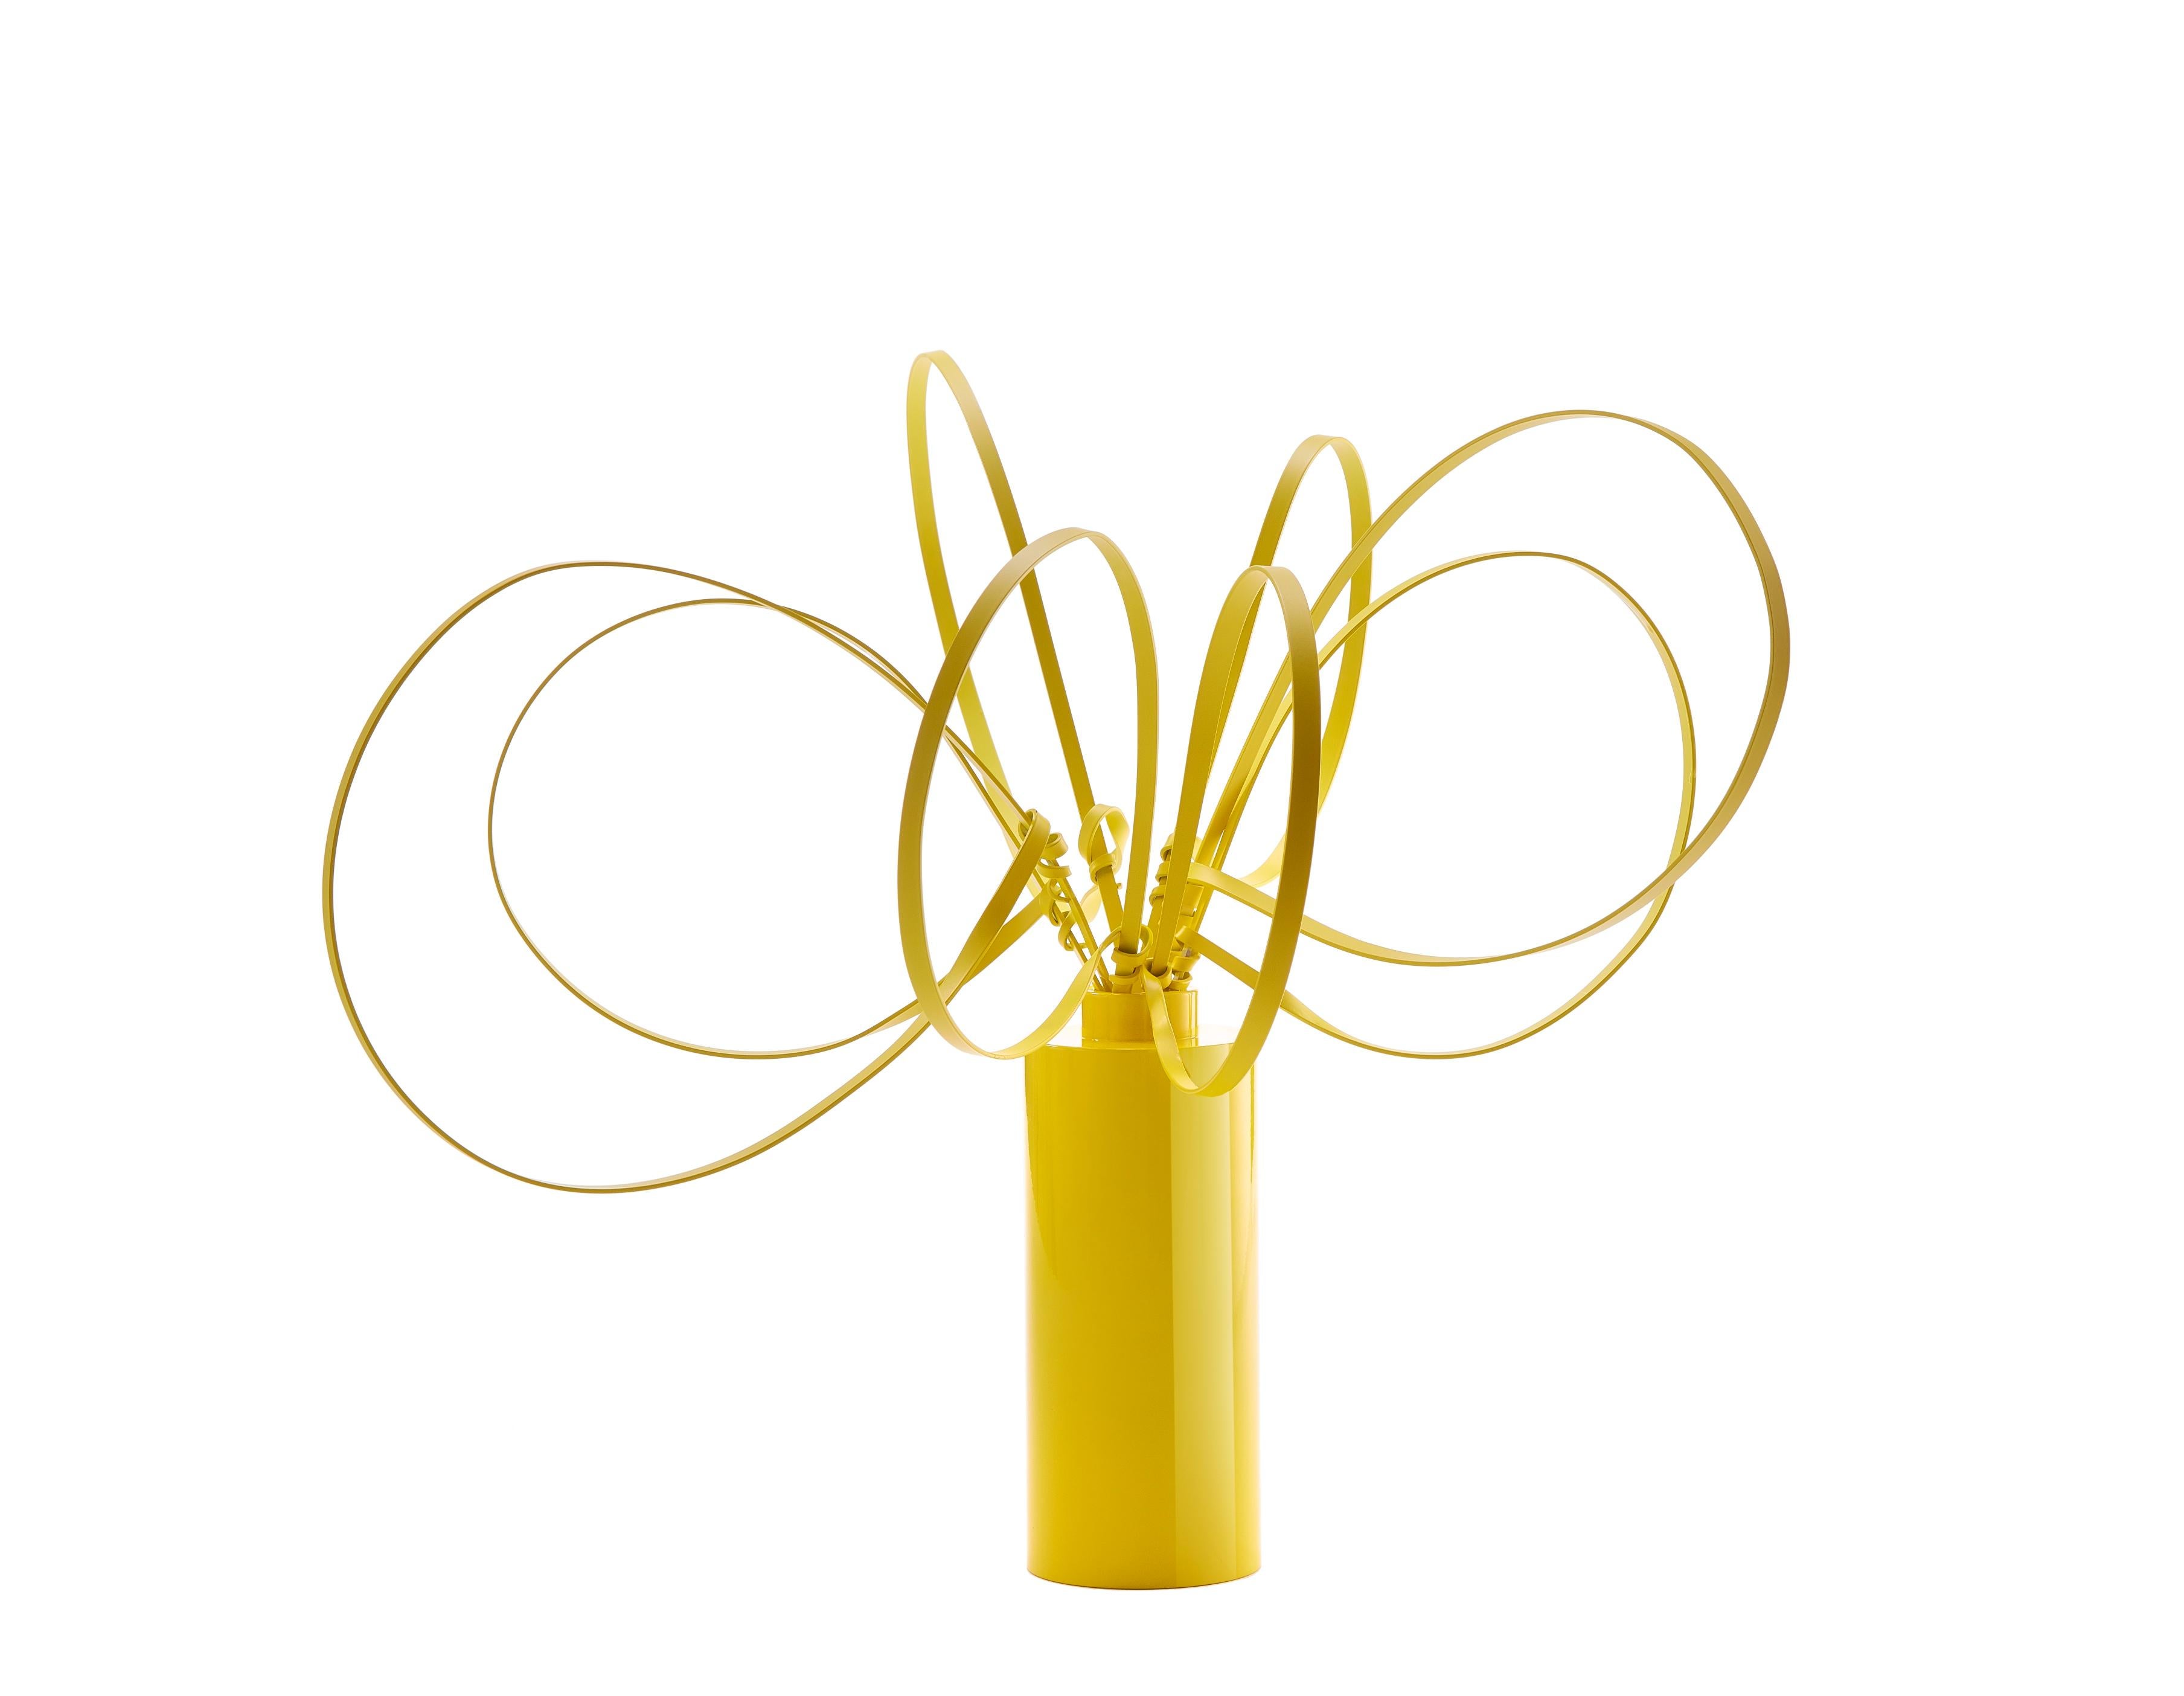 Tall sunshine swirls by Art Flower Maker.
Unique piece.
Dimensions: Ø 58 x H 43cm.
Materials: Powder coated bright yellow shiny / matte aluminium.

The artistic eye of The Art Flower Maker combined with Italian artisanal metalwork has brought